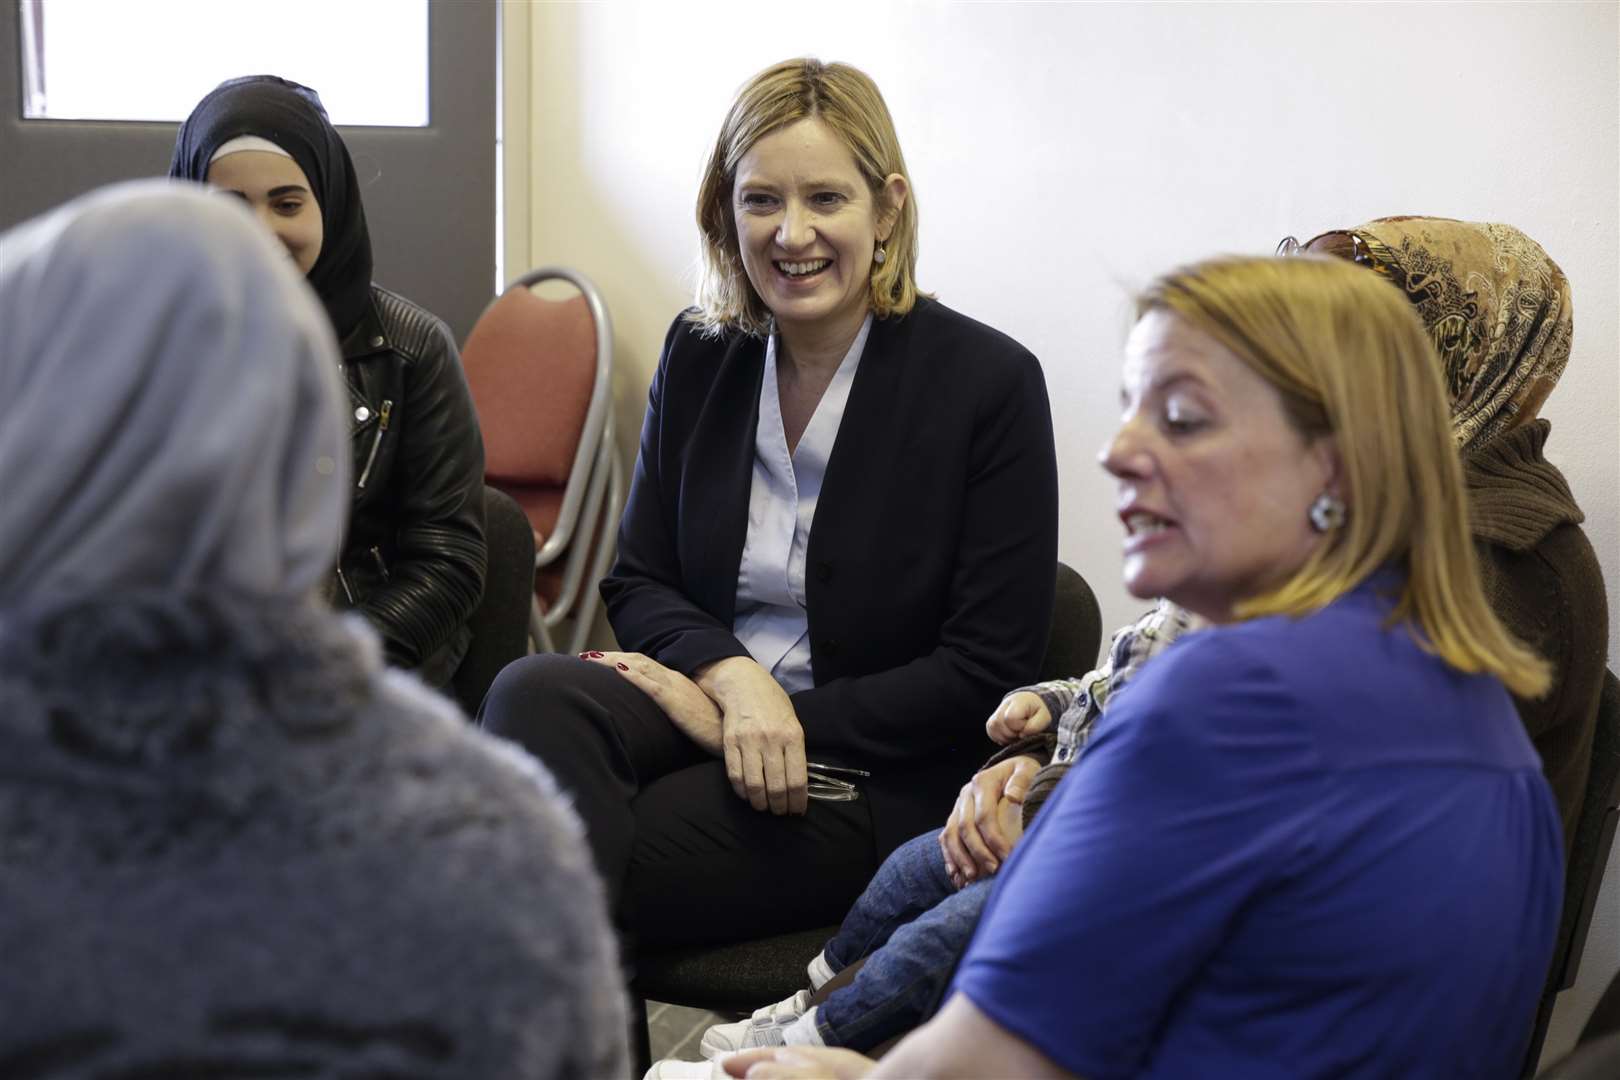 Amber Rudd meets some of the refugees.